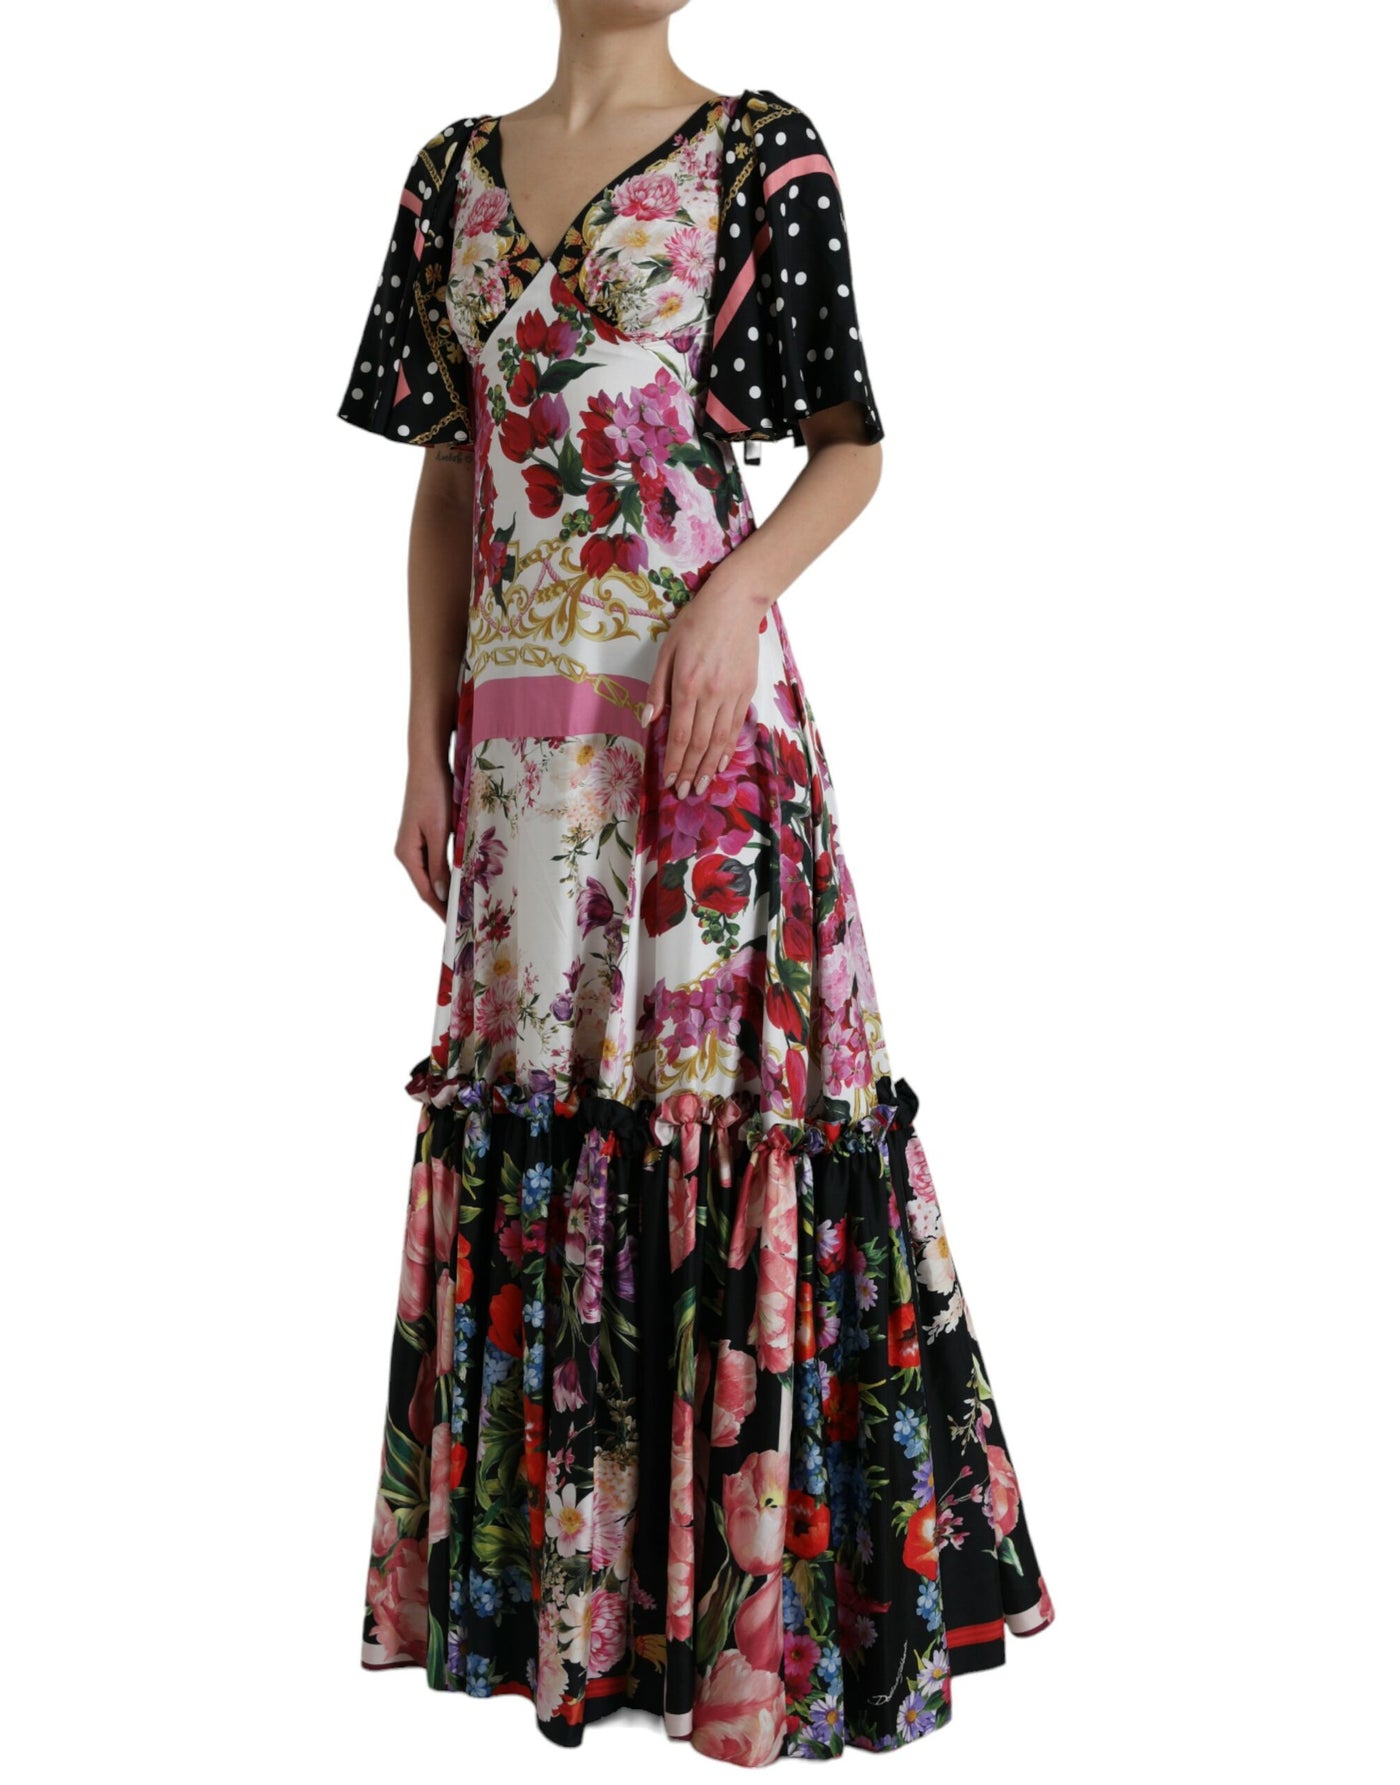 Dolce & Gabbana Multicolor Floral Print Silk Twill Gown Dress